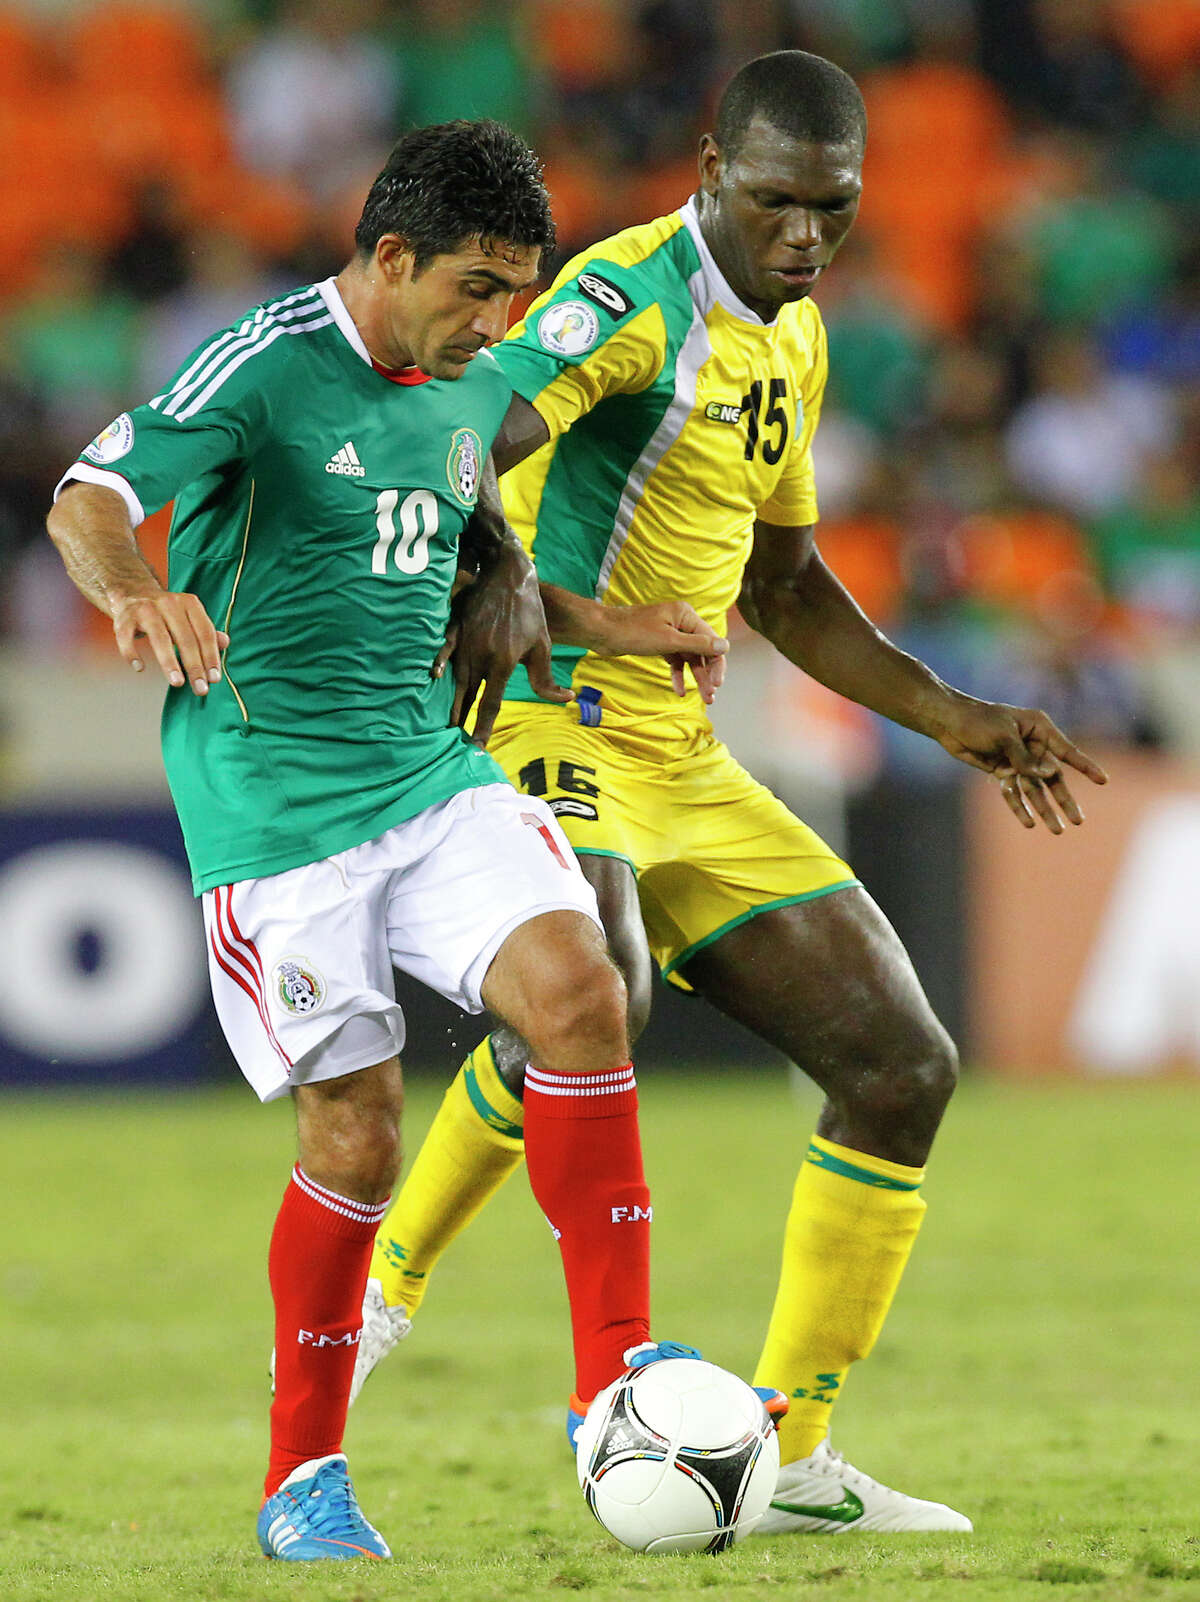 Mexico's Antonio Matias left, takes possession from a Guyana defender during the second half of their FIFA World Cup qualifying match at BBVA Compass Stadium Friday, Oct. 12, 2012, in Houston. Mexico won 5-0.